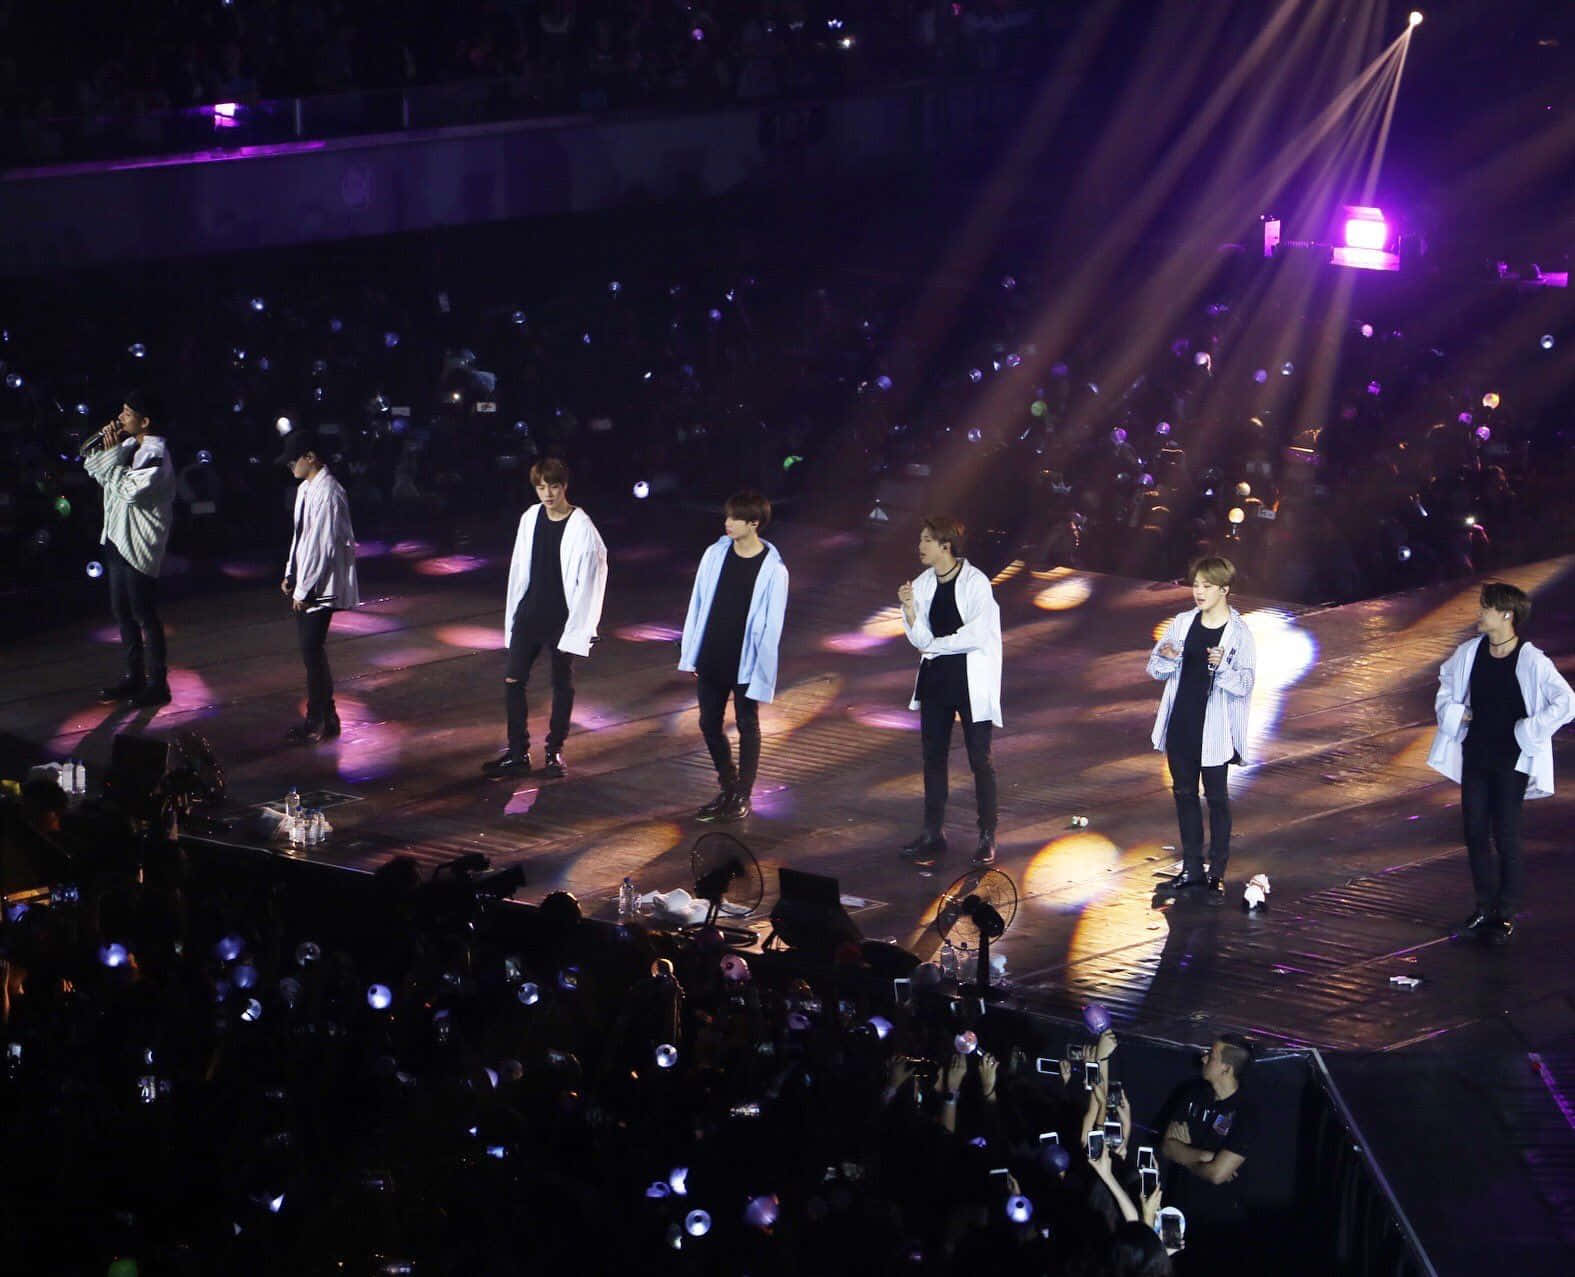 Bts - A Concert With Many People On Stage